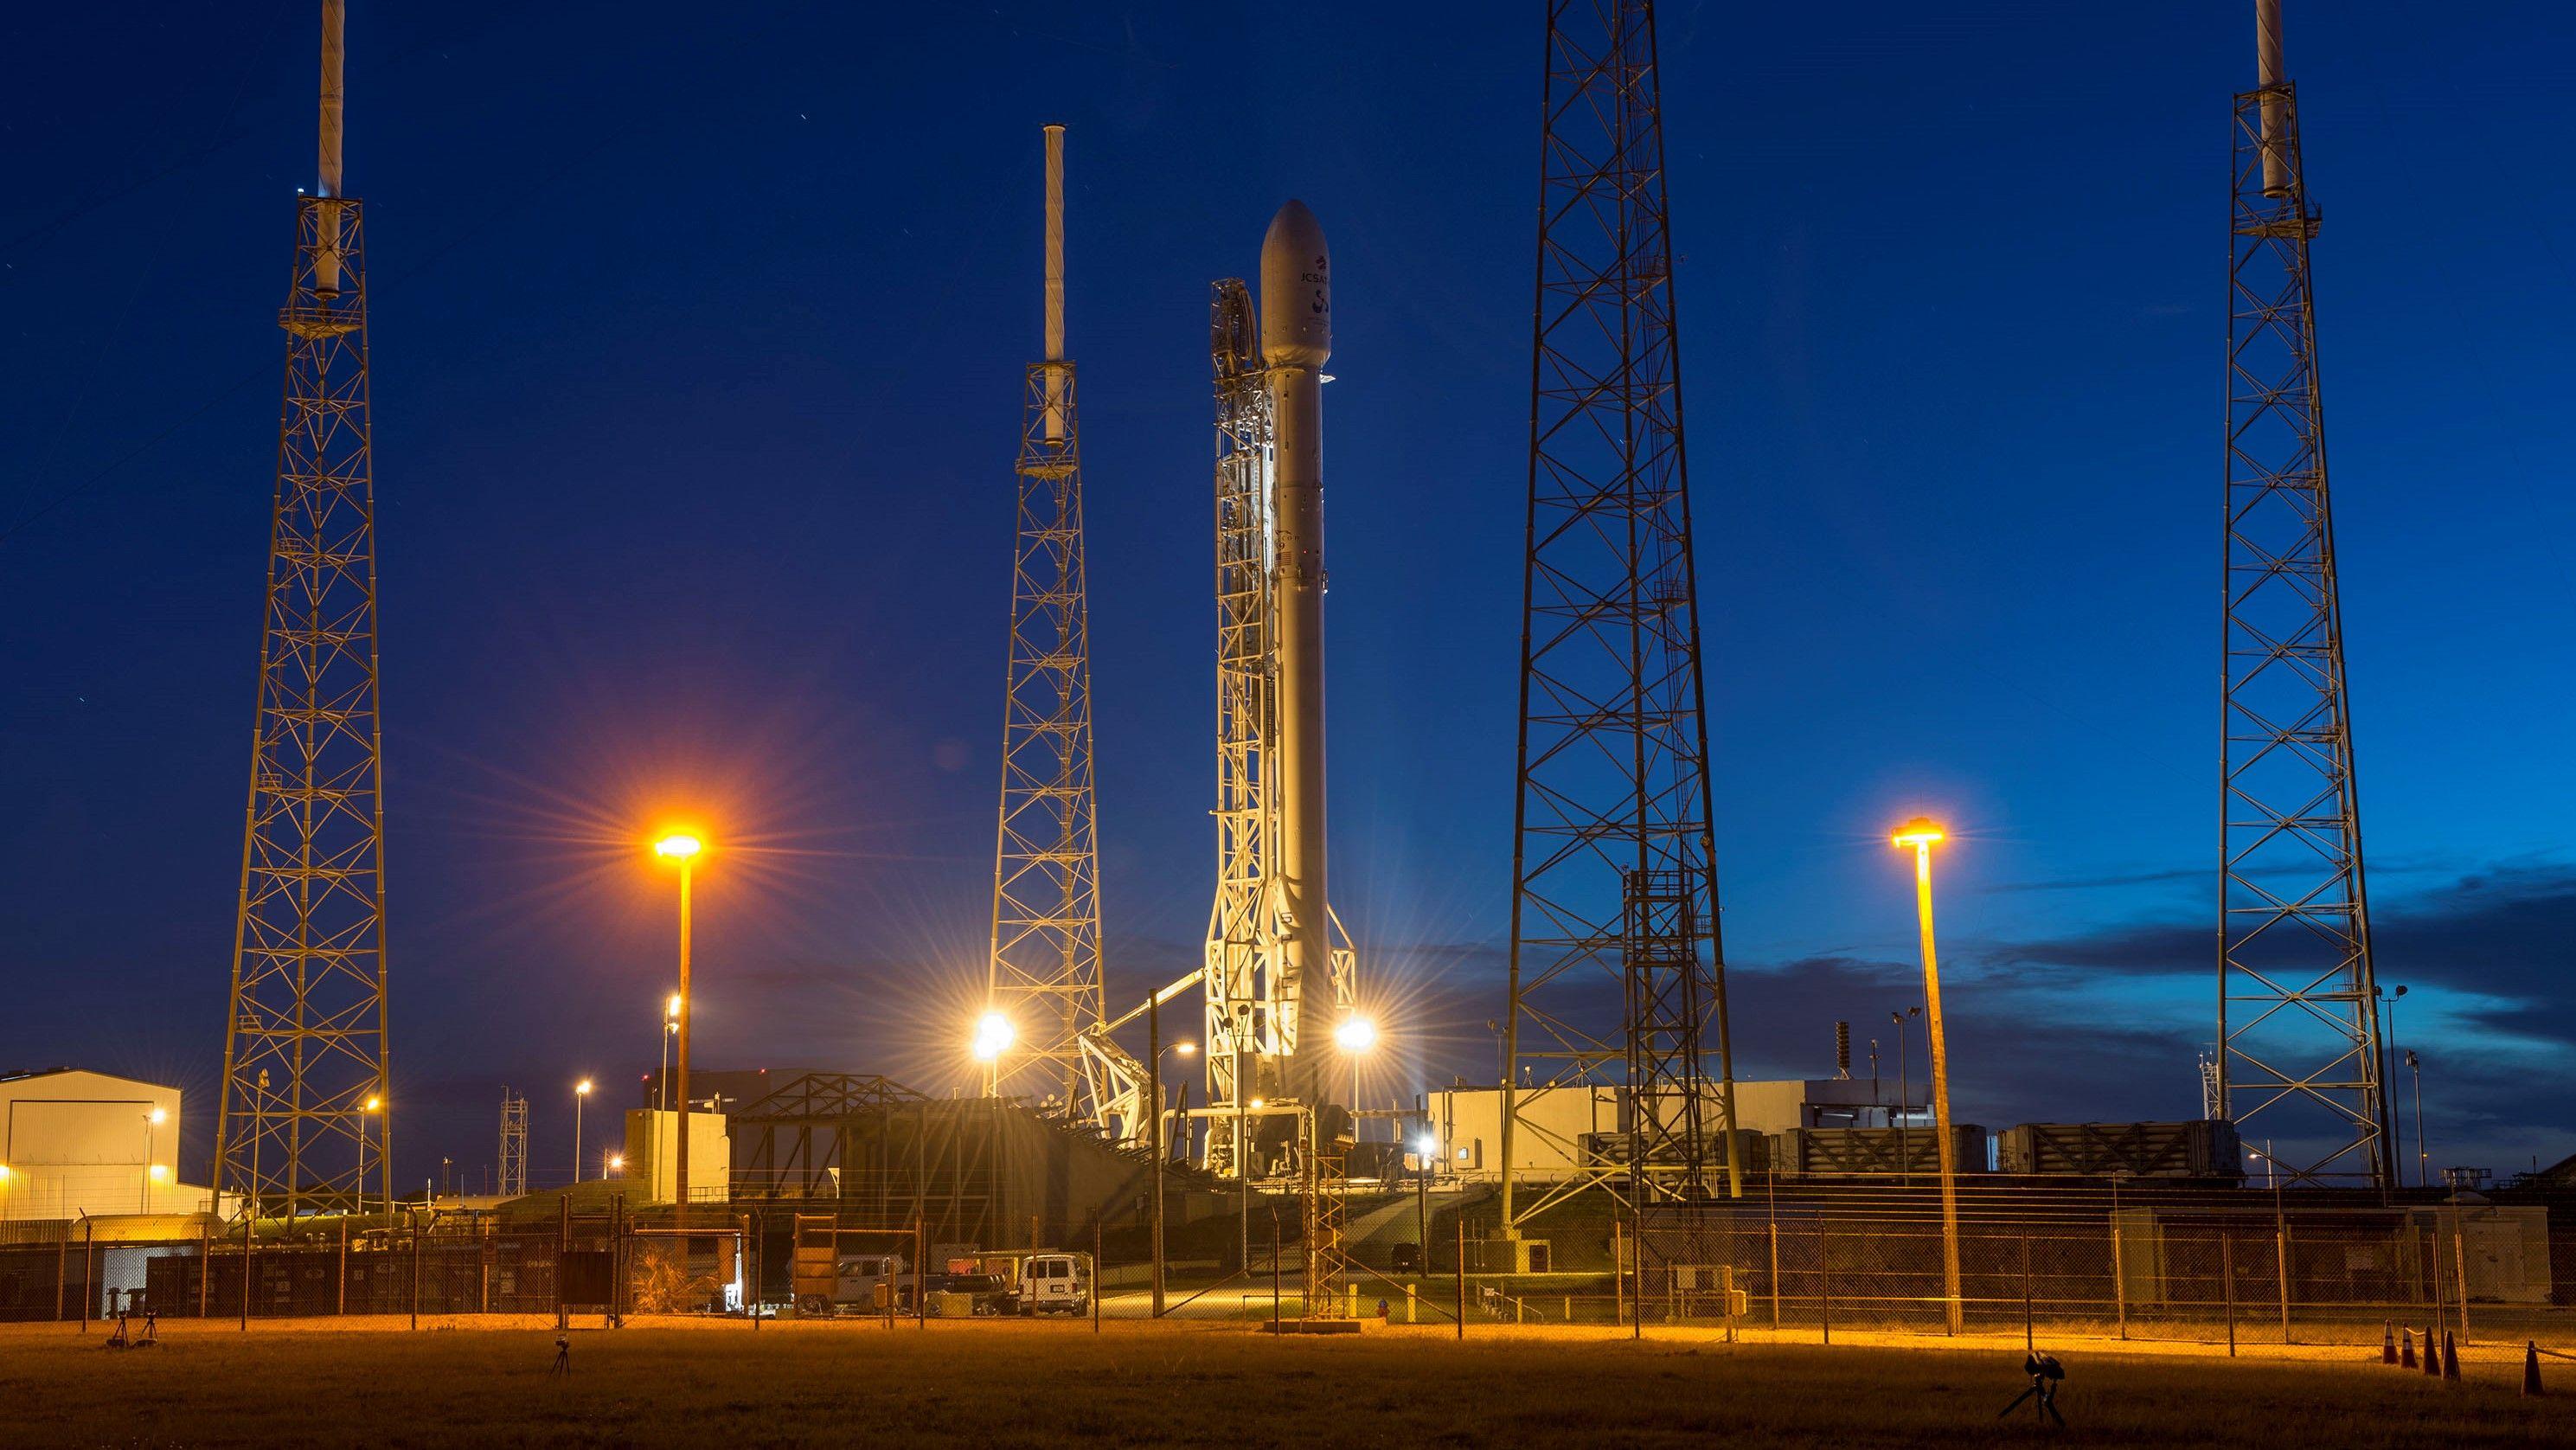 spaceX falcon 9 Full HD Wallpaper and Backgroundx1676